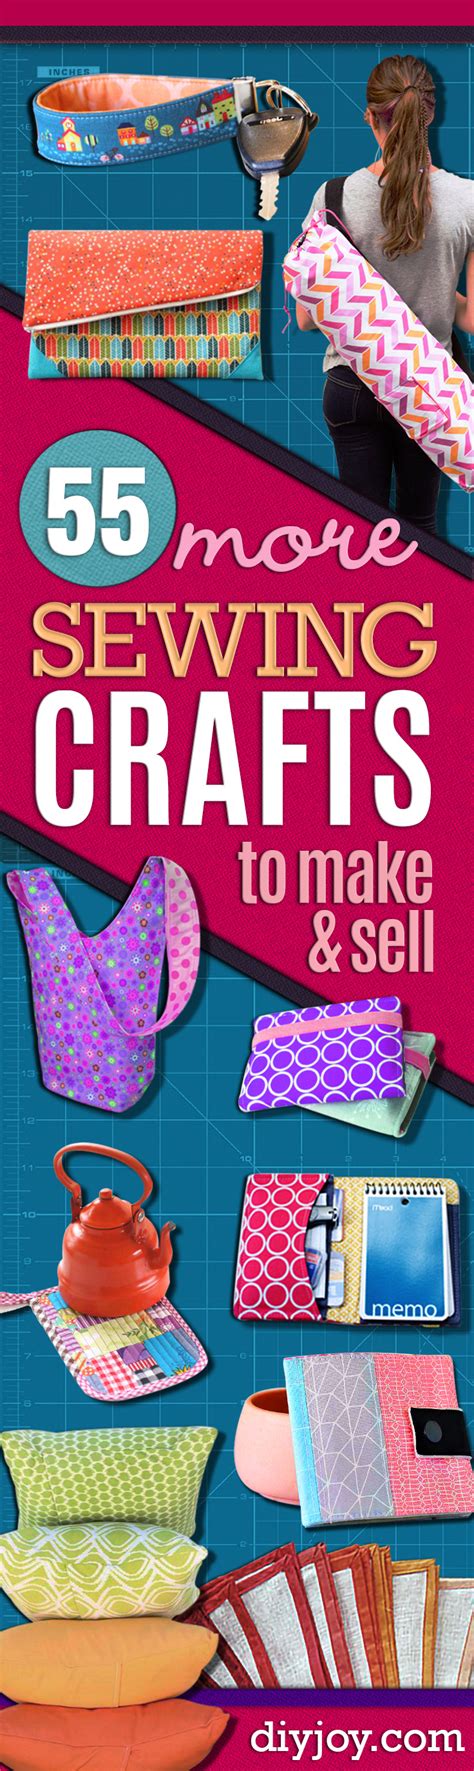 55 Sewing Crafts To Make And Sell